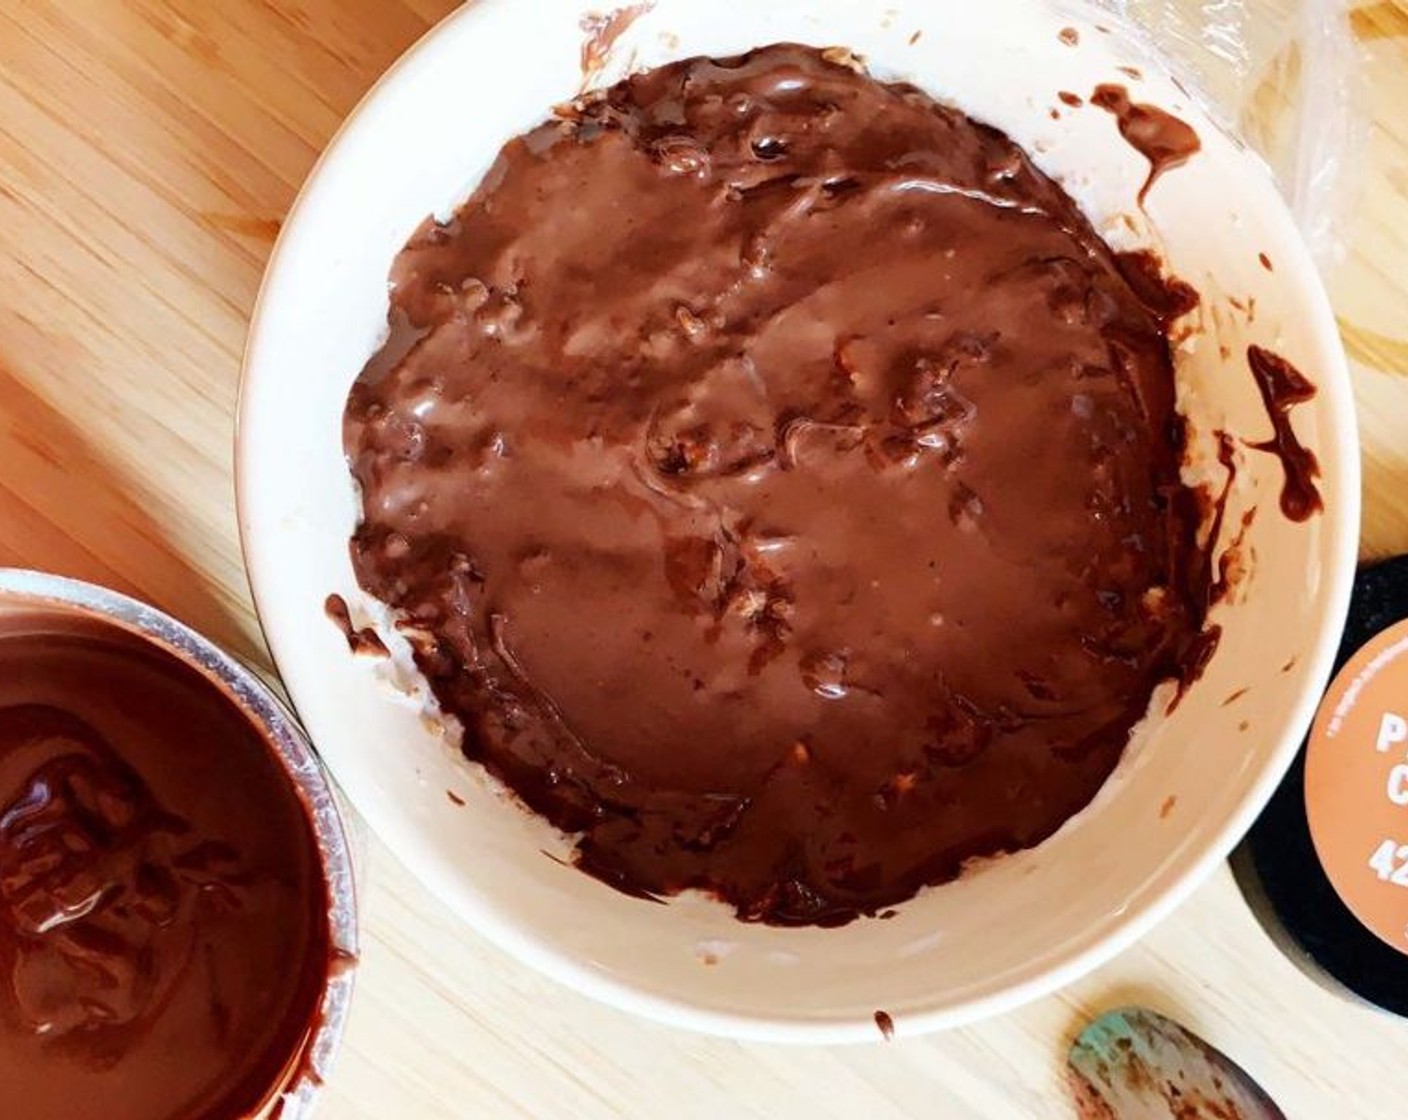 step 2 Stir again and let cool down to lukewarm. Add in the Greek Yogurt (1/4 cup) and stir it gently. Cover the top with Chocolate Protein Cream (2 Tbsp).